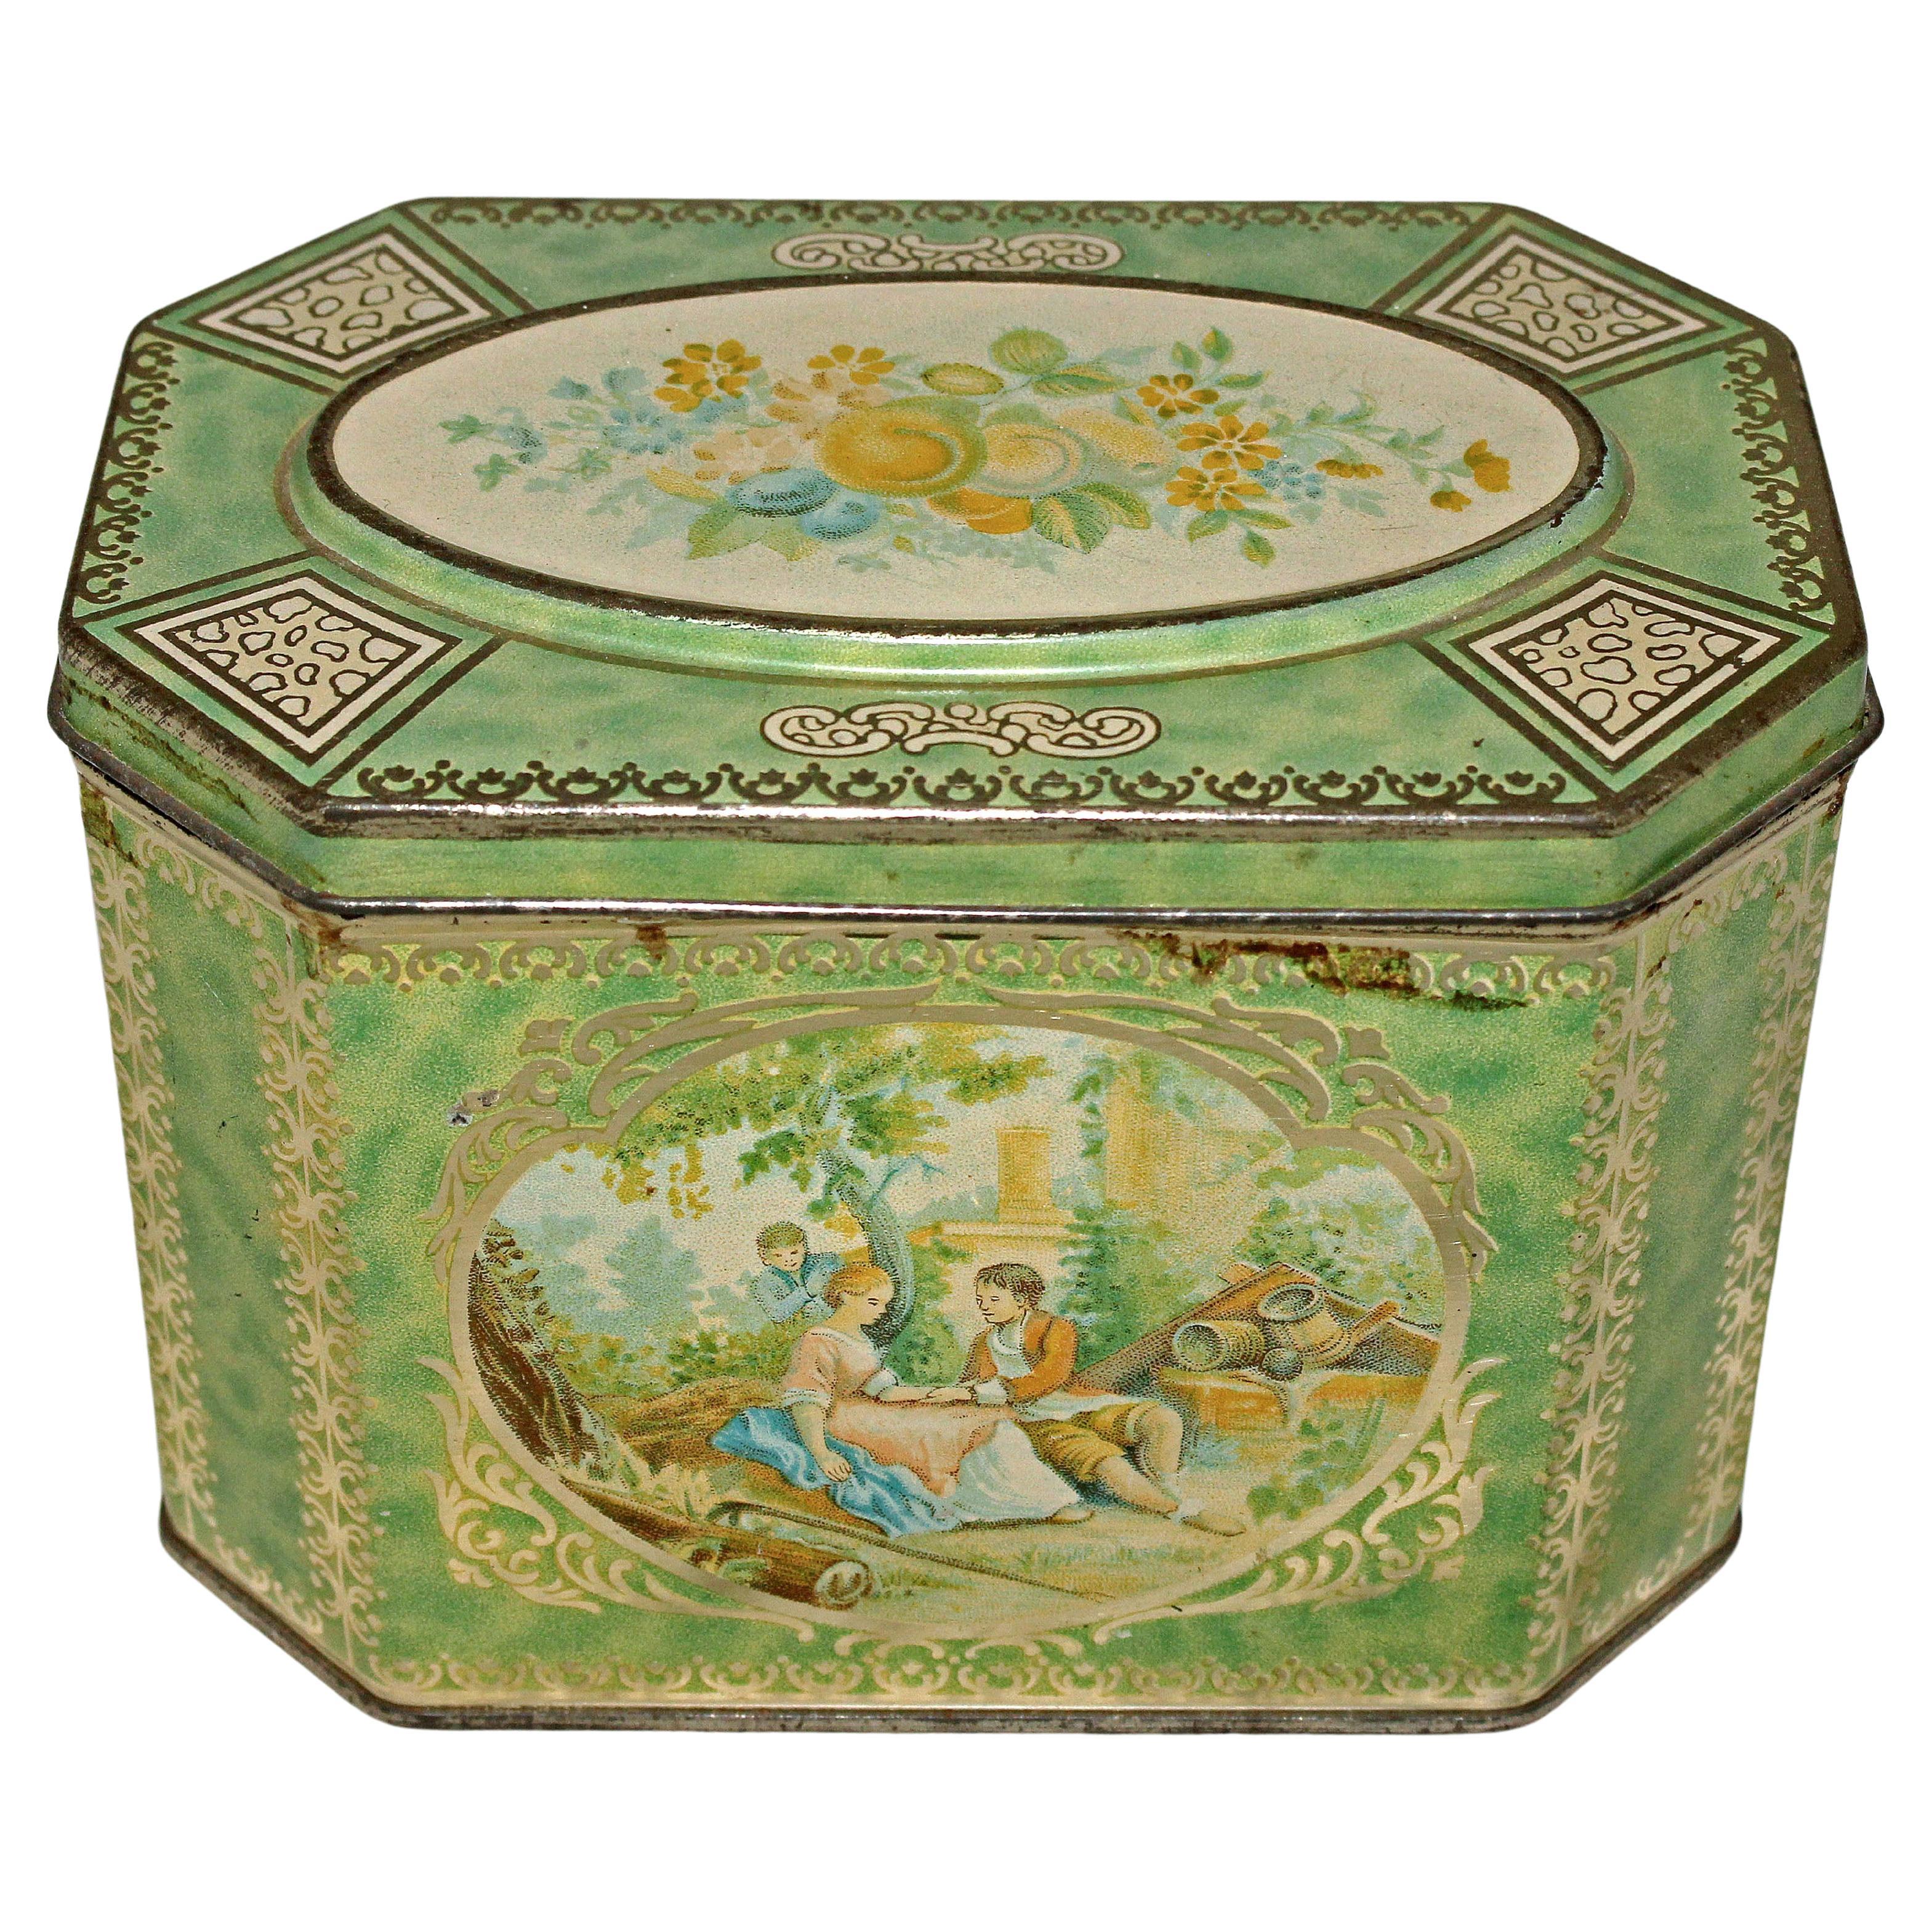 Circa 1930s Huntley & Palmers Biscuit Tin